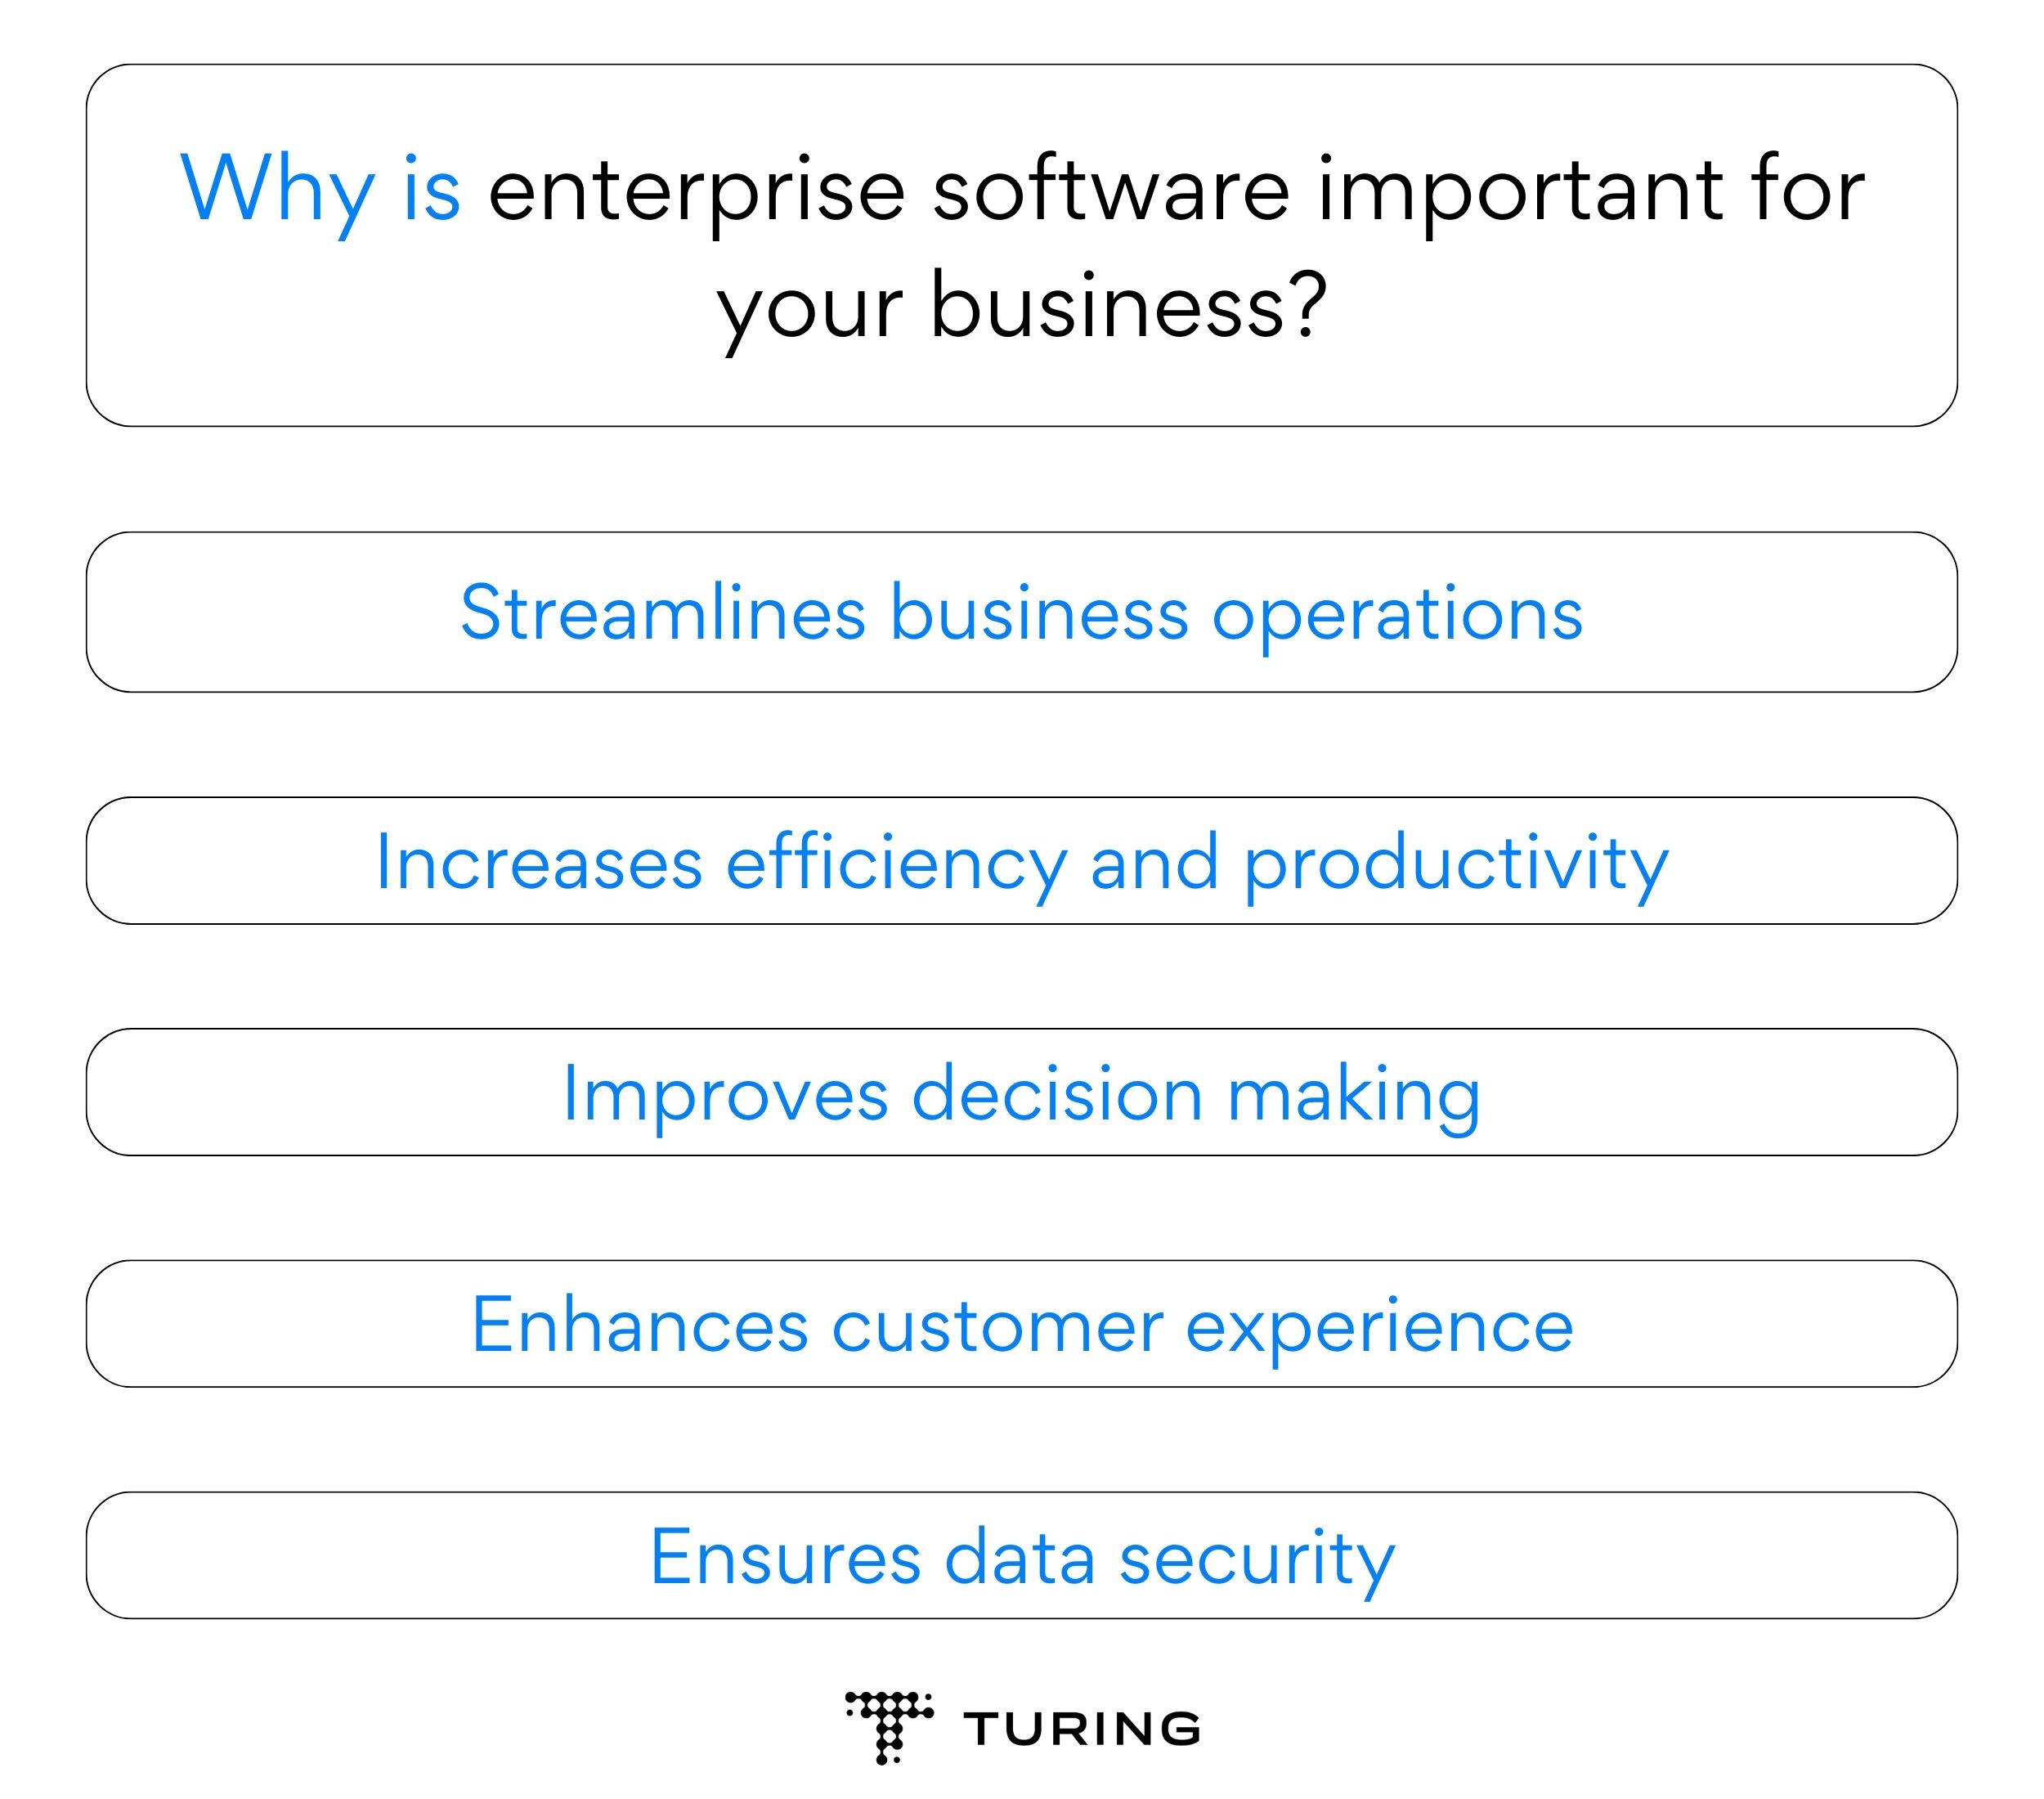 Why is enterprise software important for your business